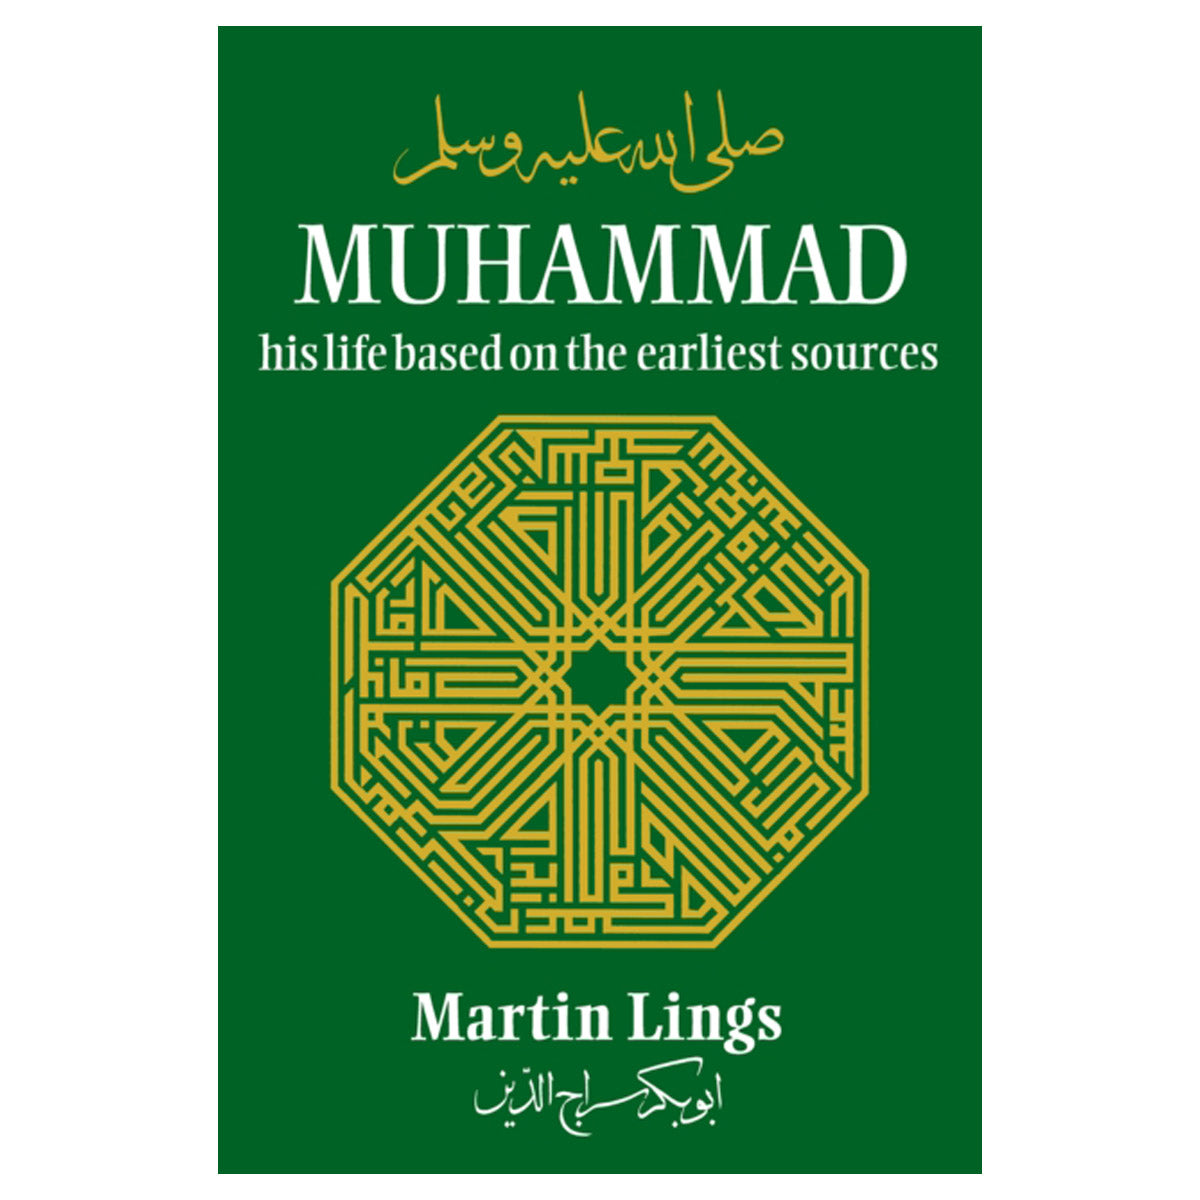 Muhammad His Life Based On The Earliest Sources by Martin Lings